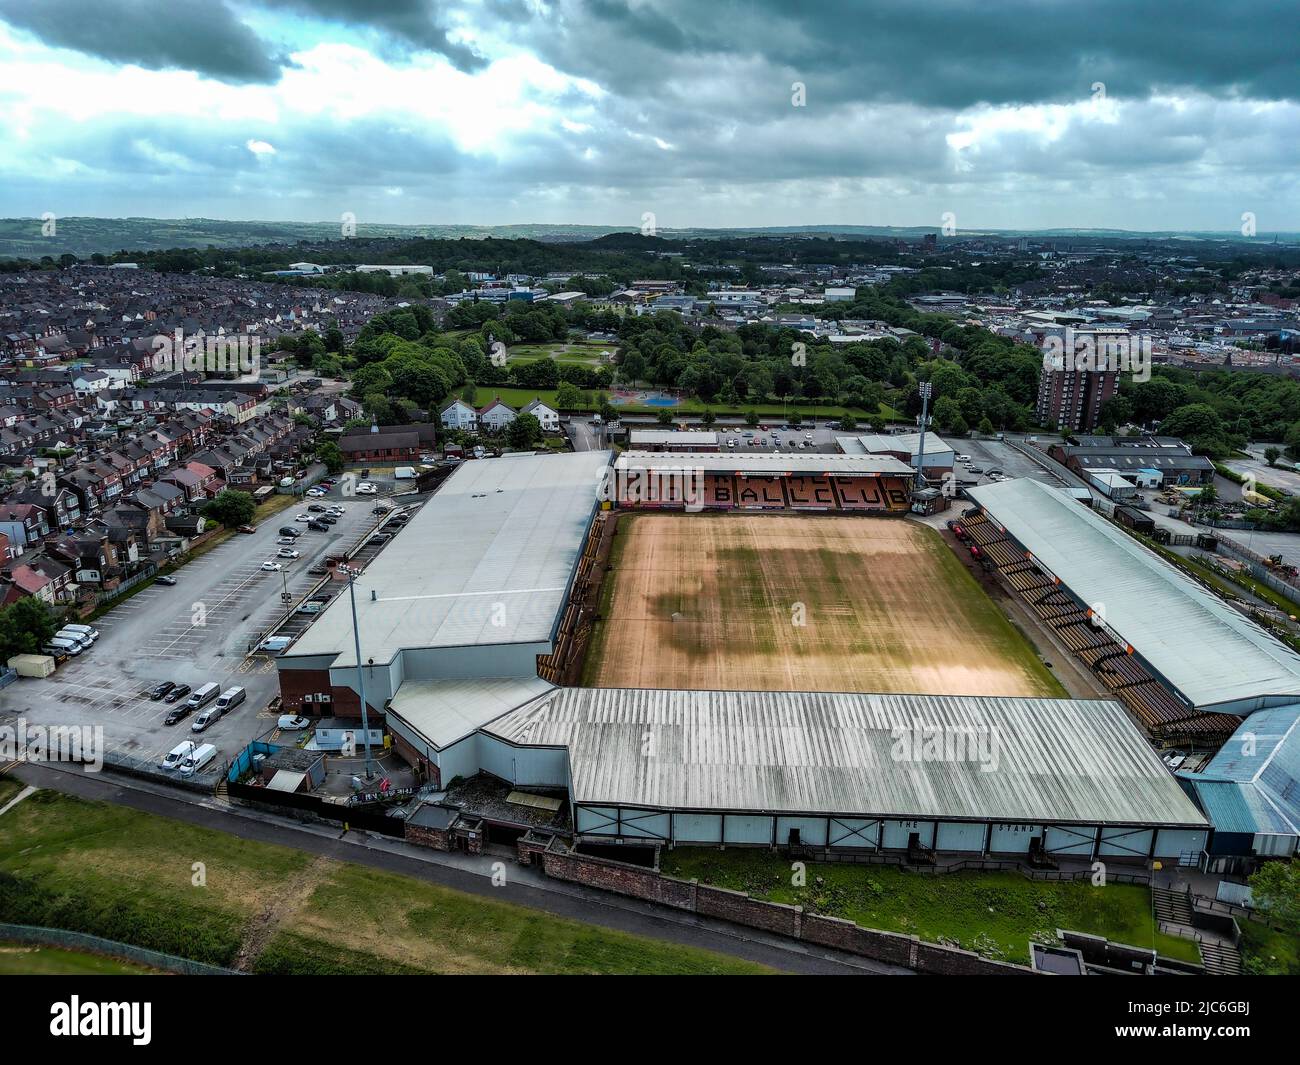 Off Season Vale Park, Port Vale Football Club Aerial Image Update , Pitch has been seeded and sanded Stock Photo